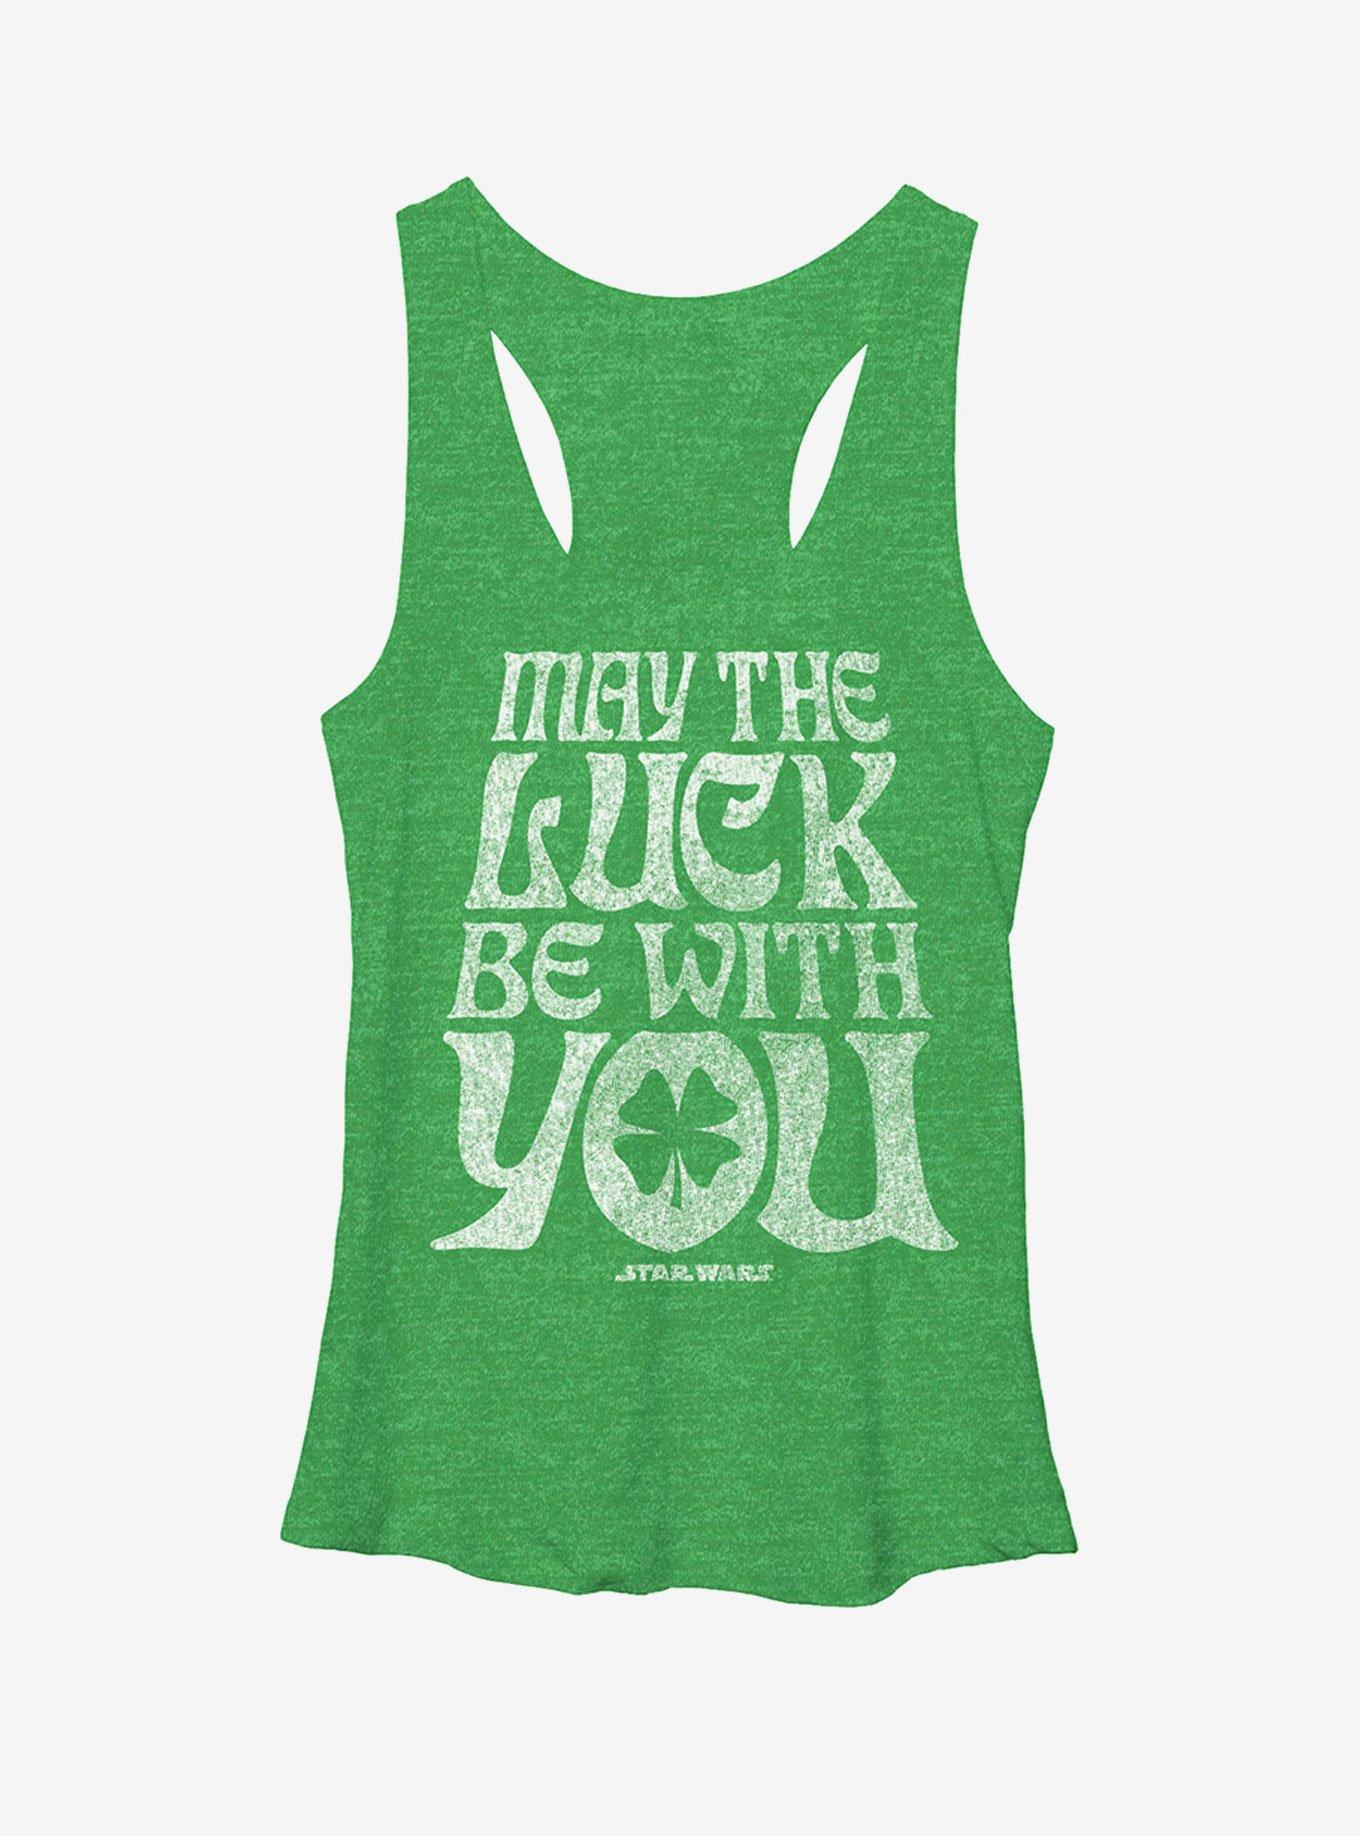 Star Wars St. Patrick's Day May the Luck Be With You Womens Tank, ENVY, hi-res